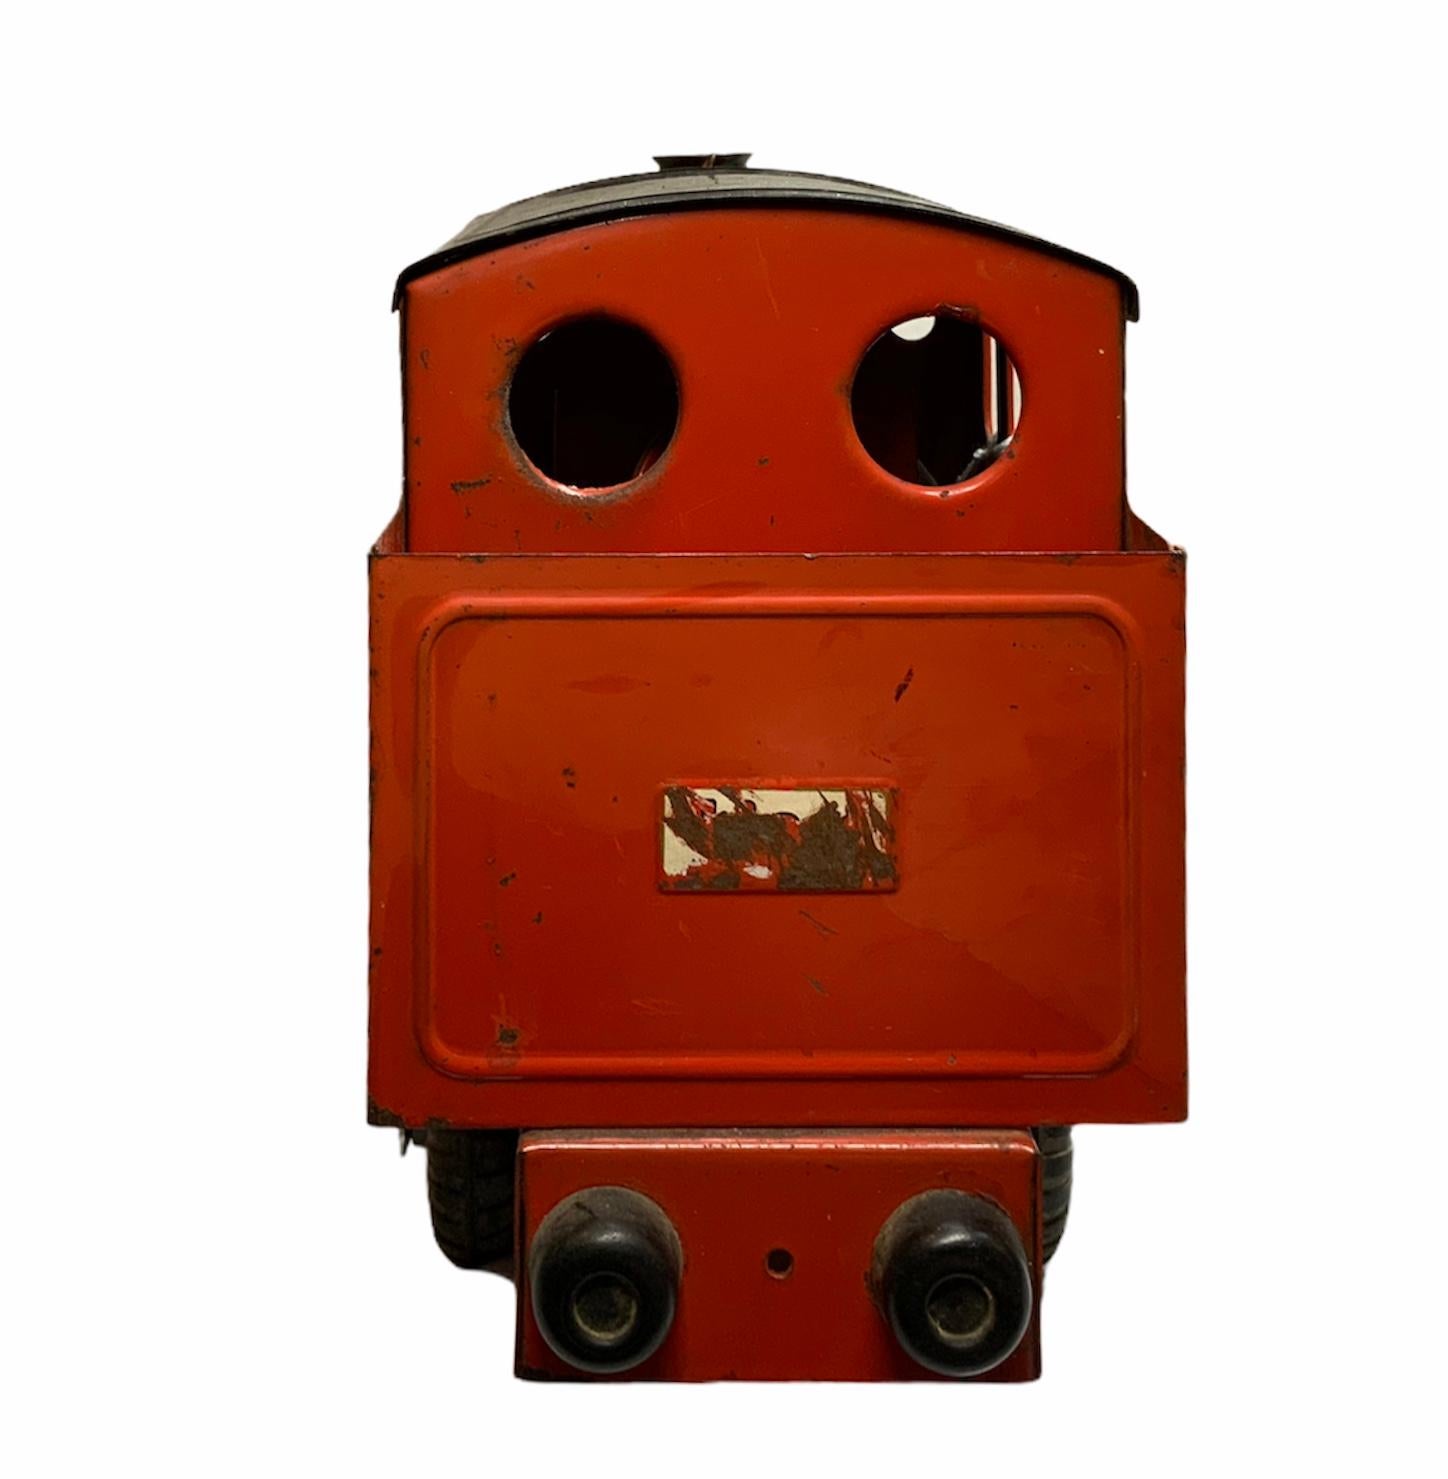 This is a bright orange and black color train-steam locomotives metal toy. It has four black tires and a little silver metal bell in the front top of the driving control cabin.